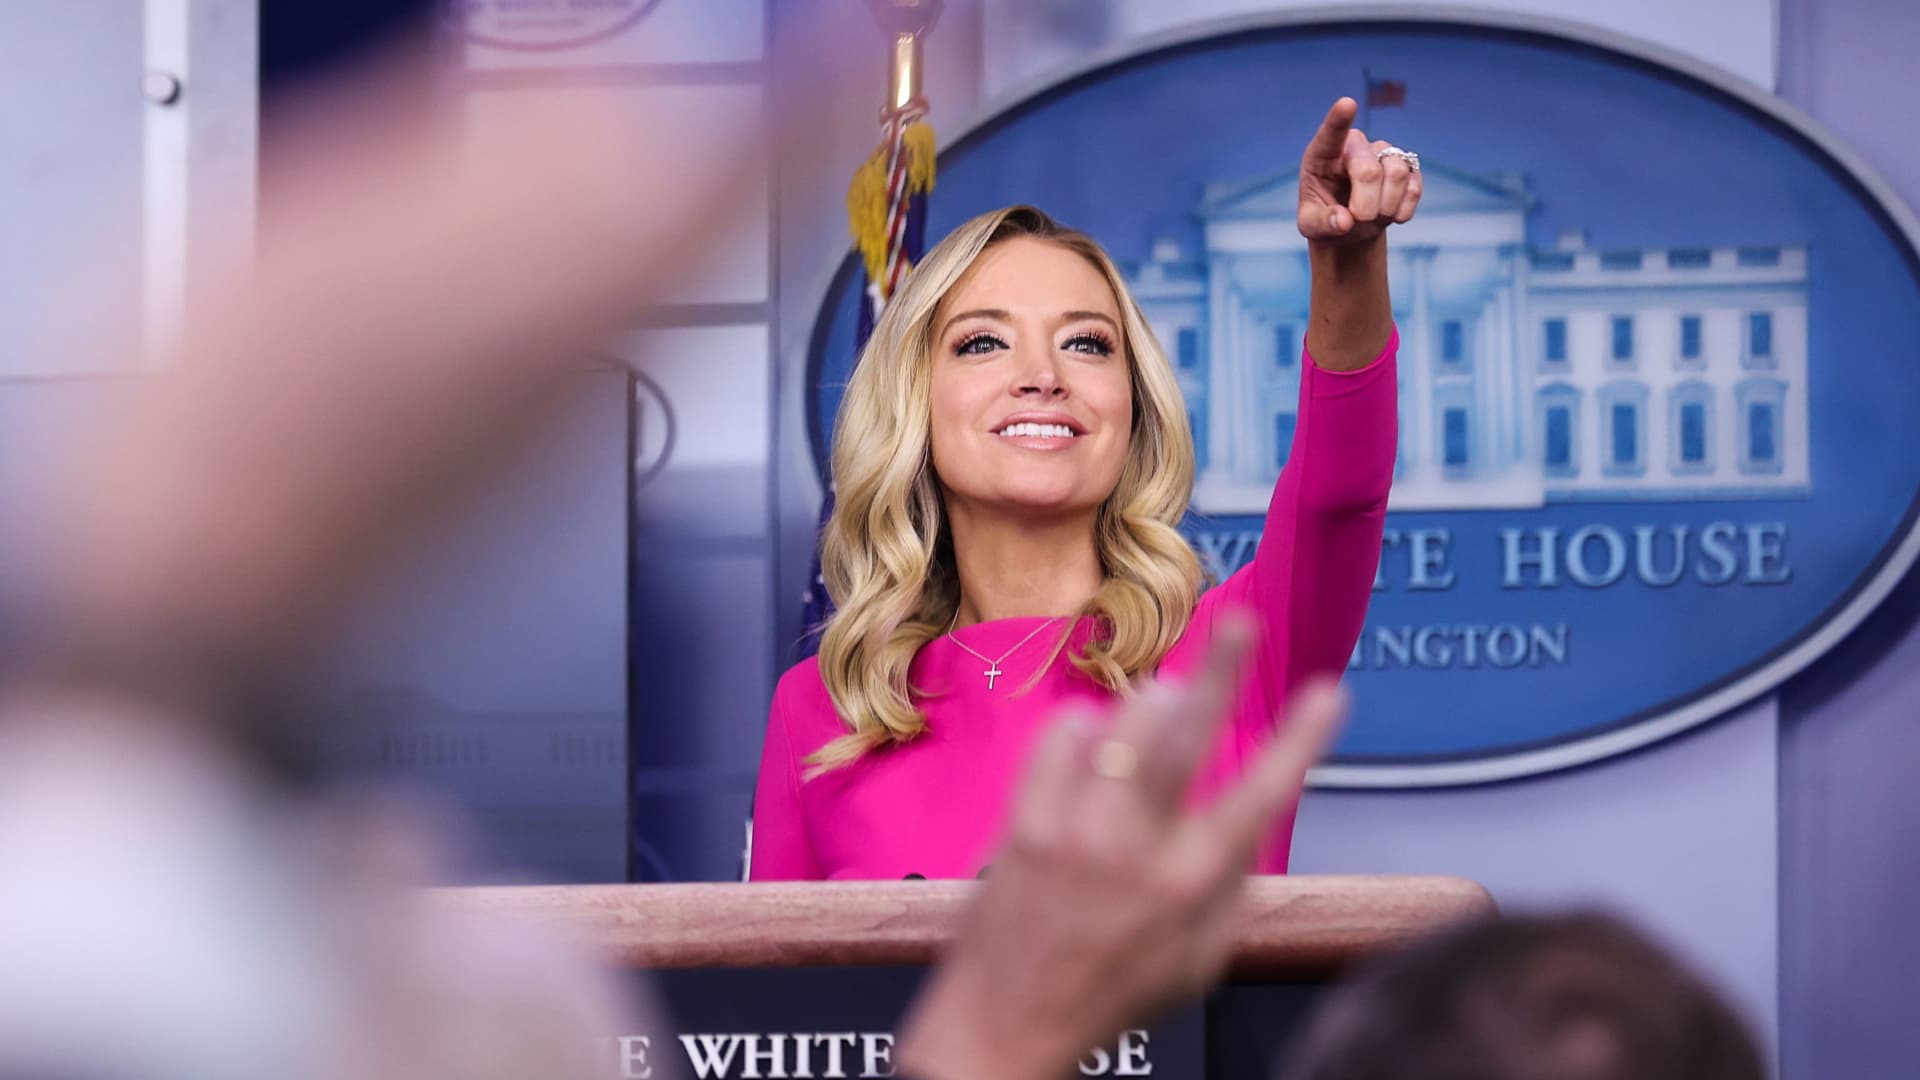 White House Press Secretary Kayleigh McEnany takes questions during a press briefing in the Brady Press Briefing Room at the White House in Washington, U.S., December 2, 2020.